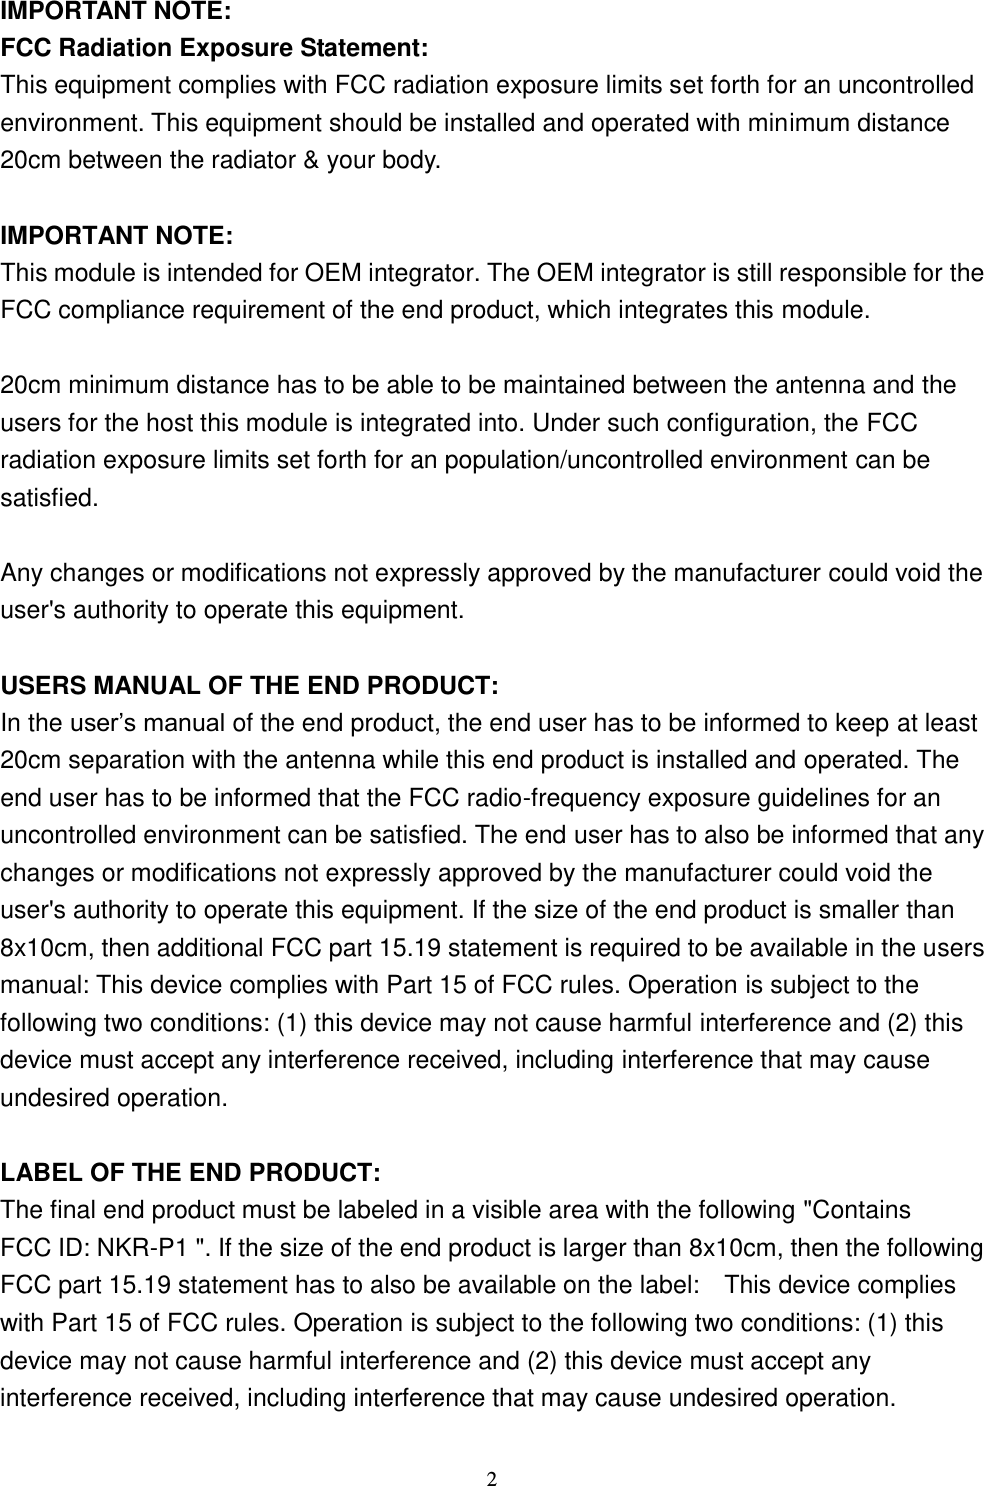  2 IMPORTANT NOTE: FCC Radiation Exposure Statement: This equipment complies with FCC radiation exposure limits set forth for an uncontrolled environment. This equipment should be installed and operated with minimum distance 20cm between the radiator &amp; your body.  IMPORTANT NOTE: This module is intended for OEM integrator. The OEM integrator is still responsible for the FCC compliance requirement of the end product, which integrates this module.  20cm minimum distance has to be able to be maintained between the antenna and the users for the host this module is integrated into. Under such configuration, the FCC radiation exposure limits set forth for an population/uncontrolled environment can be satisfied.    Any changes or modifications not expressly approved by the manufacturer could void the user&apos;s authority to operate this equipment.  USERS MANUAL OF THE END PRODUCT: In the user’s manual of the end product, the end user has to be informed to keep at least 20cm separation with the antenna while this end product is installed and operated. The end user has to be informed that the FCC radio-frequency exposure guidelines for an uncontrolled environment can be satisfied. The end user has to also be informed that any changes or modifications not expressly approved by the manufacturer could void the user&apos;s authority to operate this equipment. If the size of the end product is smaller than 8x10cm, then additional FCC part 15.19 statement is required to be available in the users manual: This device complies with Part 15 of FCC rules. Operation is subject to the following two conditions: (1) this device may not cause harmful interference and (2) this device must accept any interference received, including interference that may cause undesired operation.  LABEL OF THE END PRODUCT: The final end product must be labeled in a visible area with the following &quot;Contains FCC ID: NKR-P1 &quot;. If the size of the end product is larger than 8x10cm, then the following FCC part 15.19 statement has to also be available on the label:    This device complies with Part 15 of FCC rules. Operation is subject to the following two conditions: (1) this device may not cause harmful interference and (2) this device must accept any interference received, including interference that may cause undesired operation. 